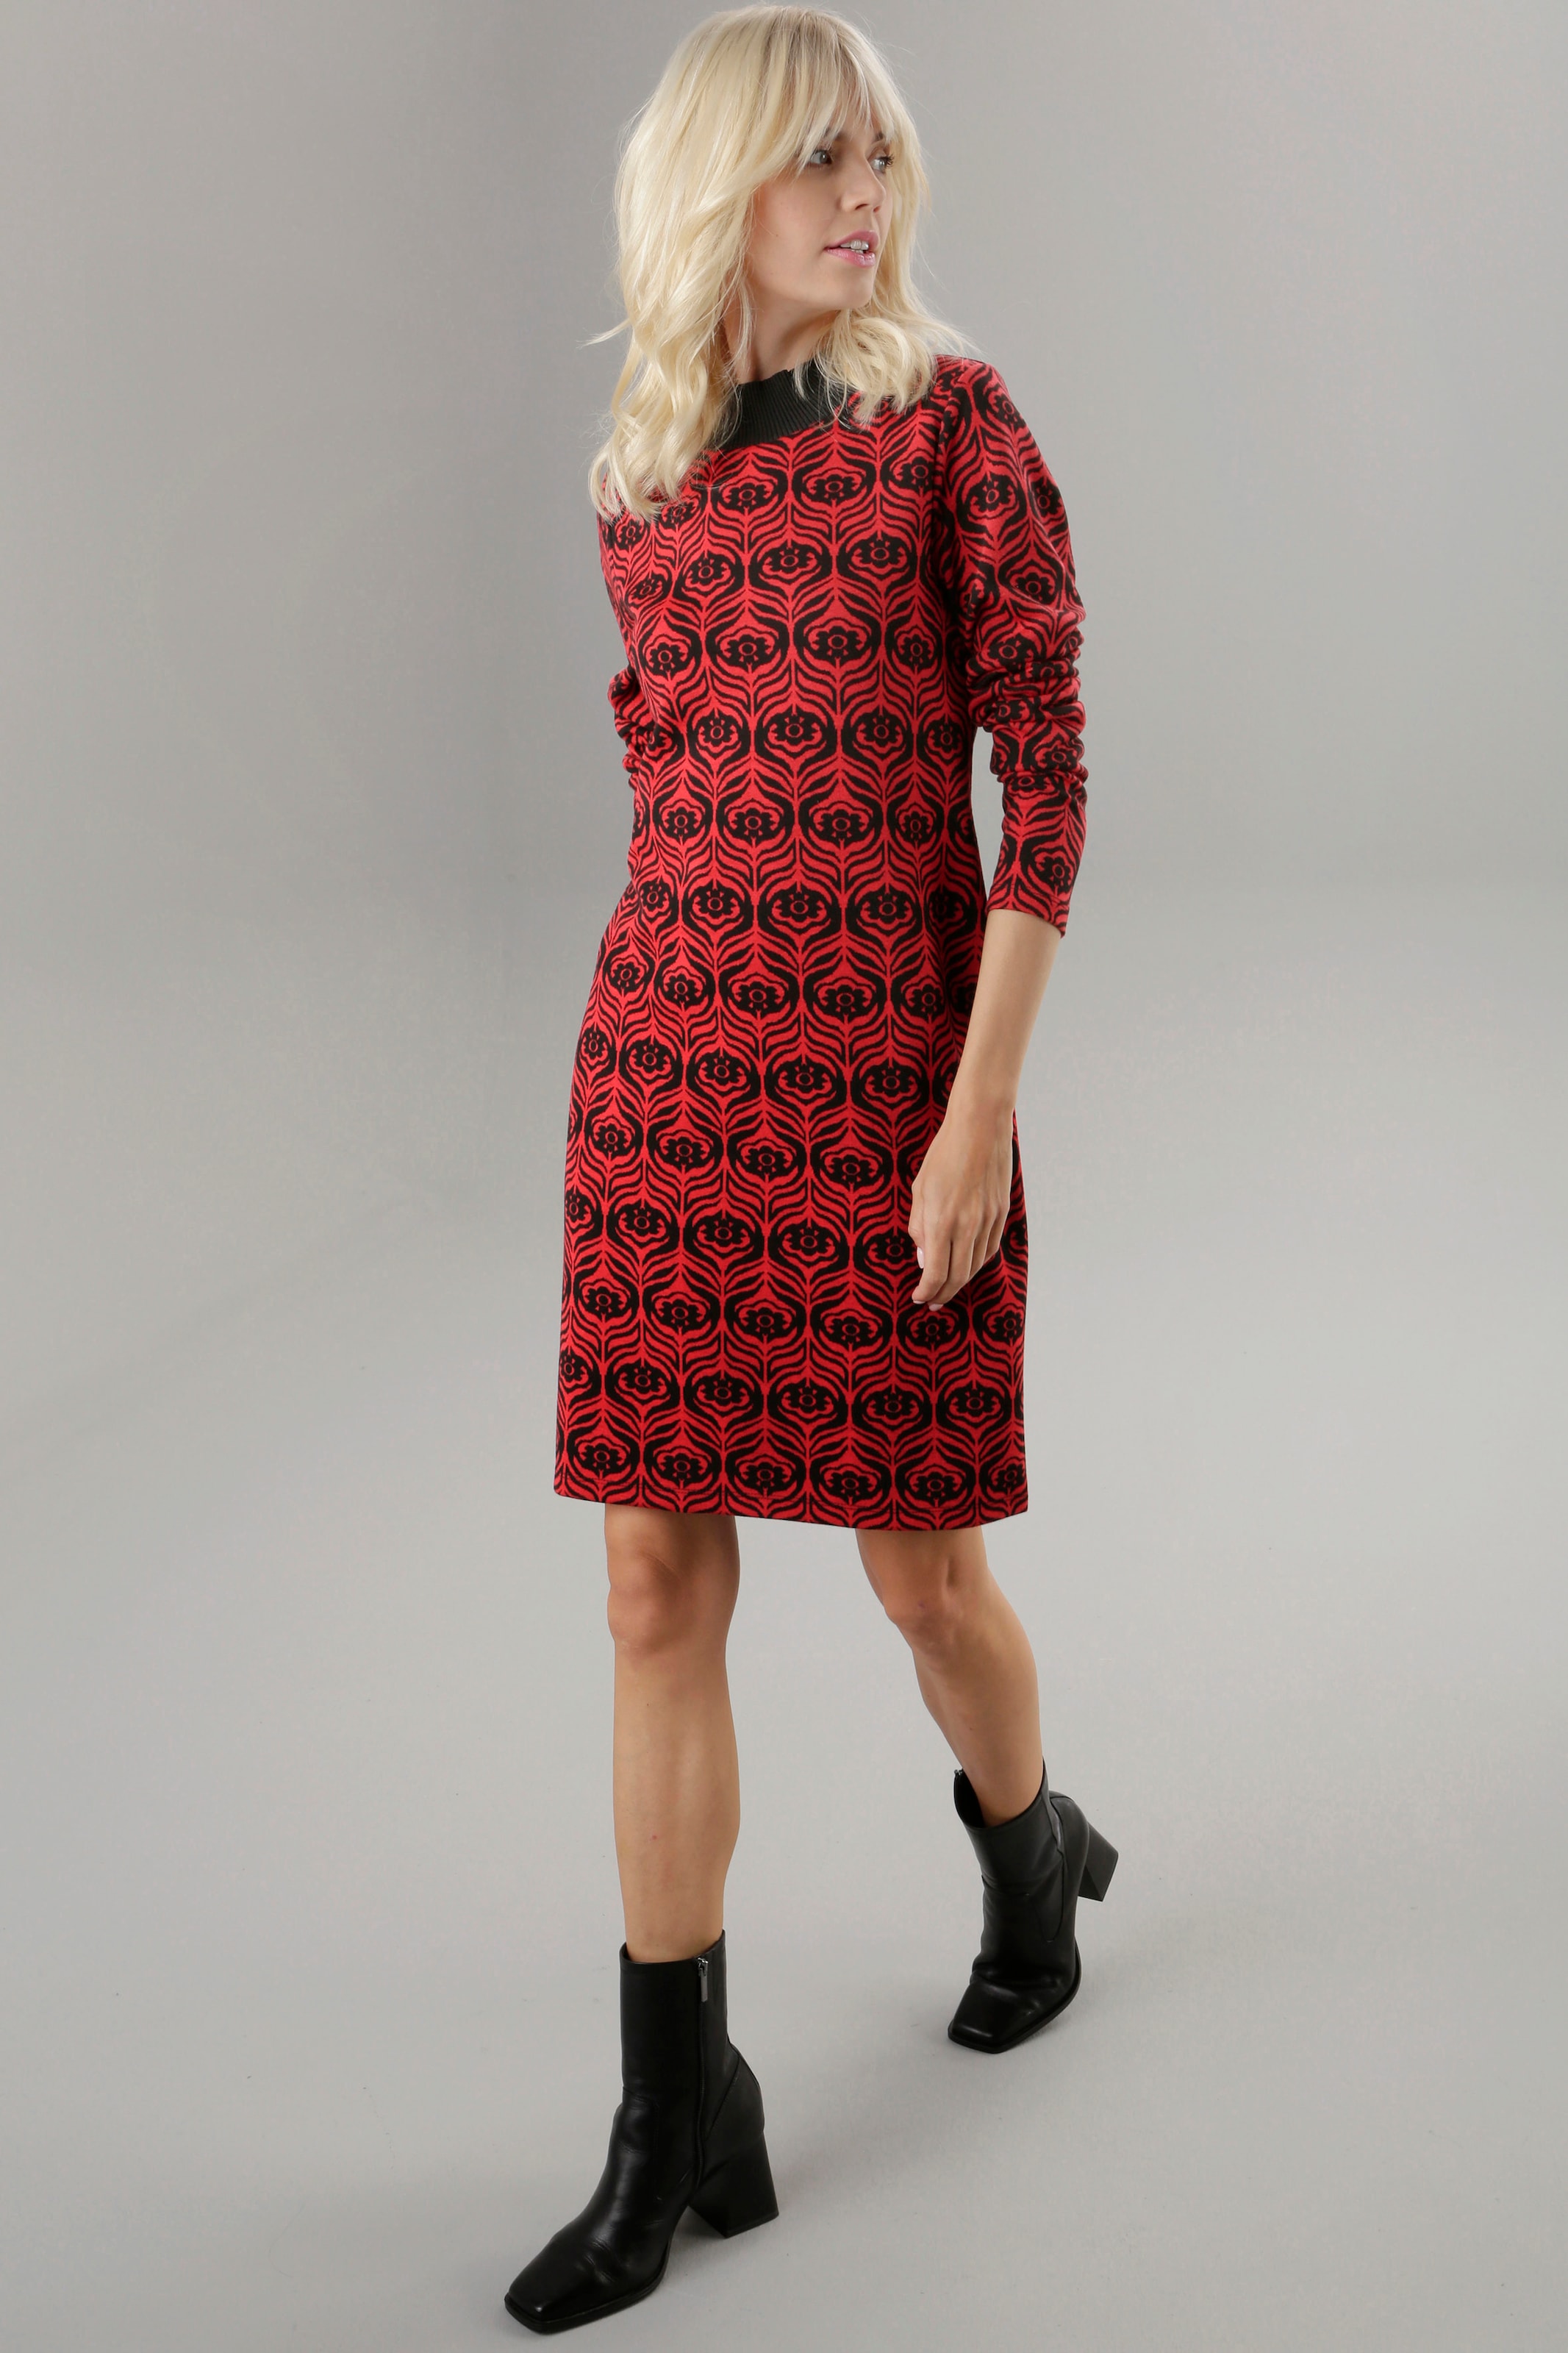 SELECTED Aniston mit online bei Jerseykleid, Retro-Muster